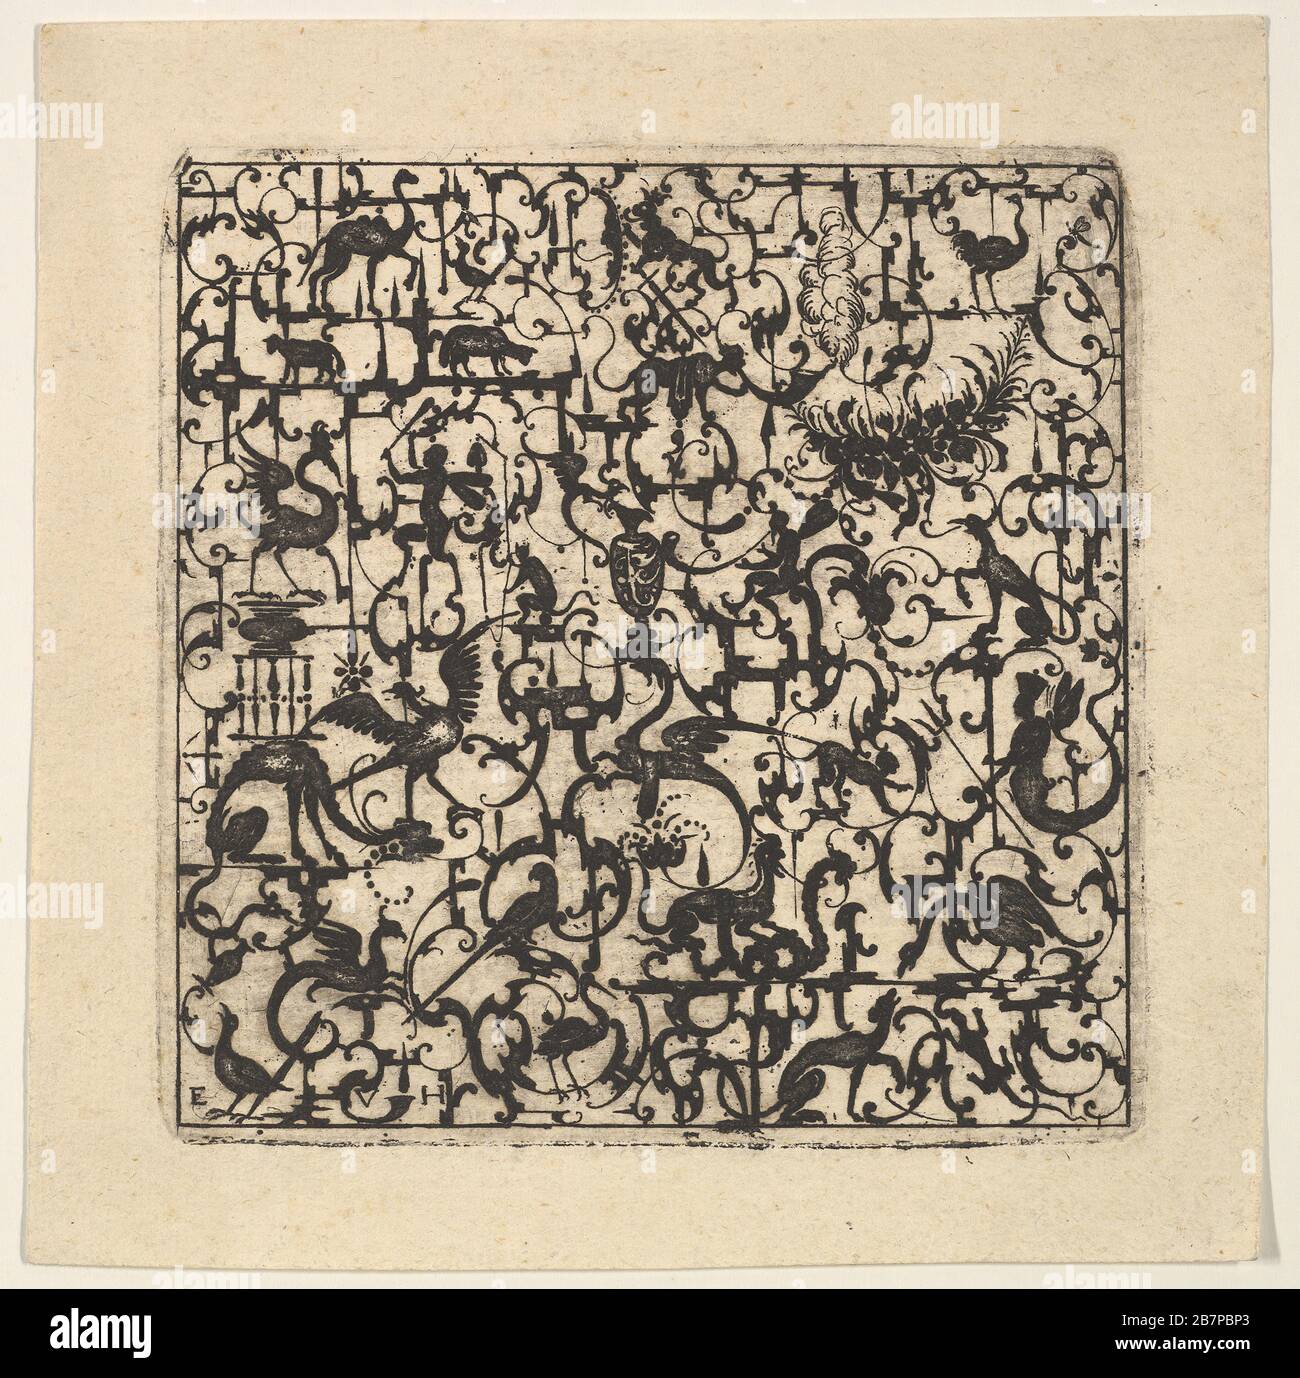 Square Blackwork Design in Silhouette Style with Schweifwerk and Grotesque Figures, 1617. Stock Photo